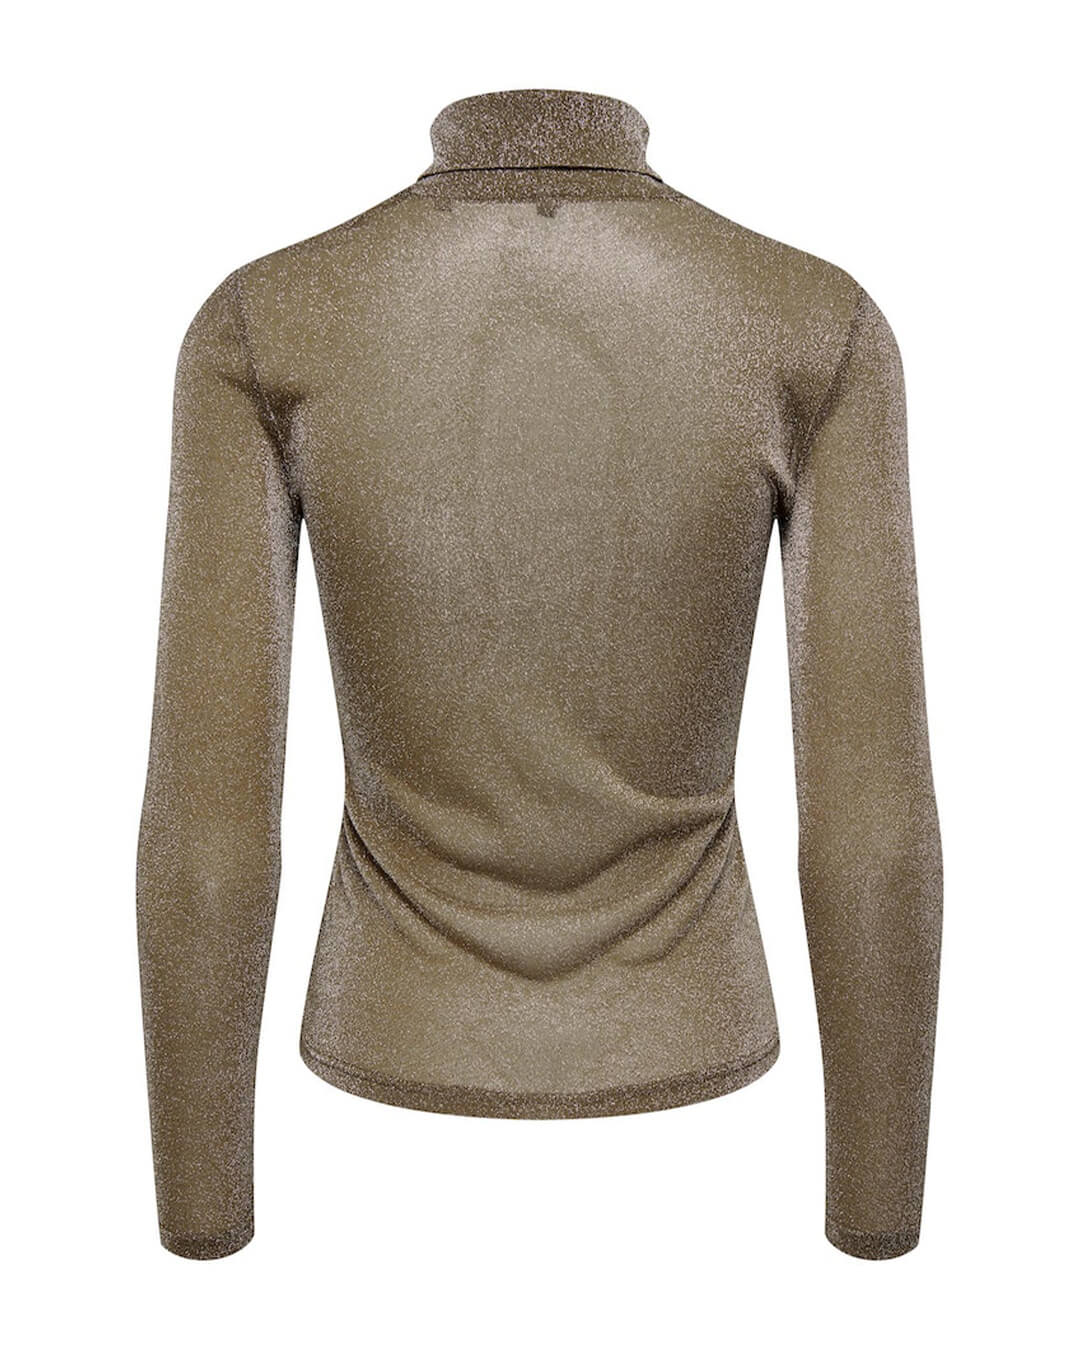 Only Jumpers Only Amera Brown Glitter Rollneck Jumper